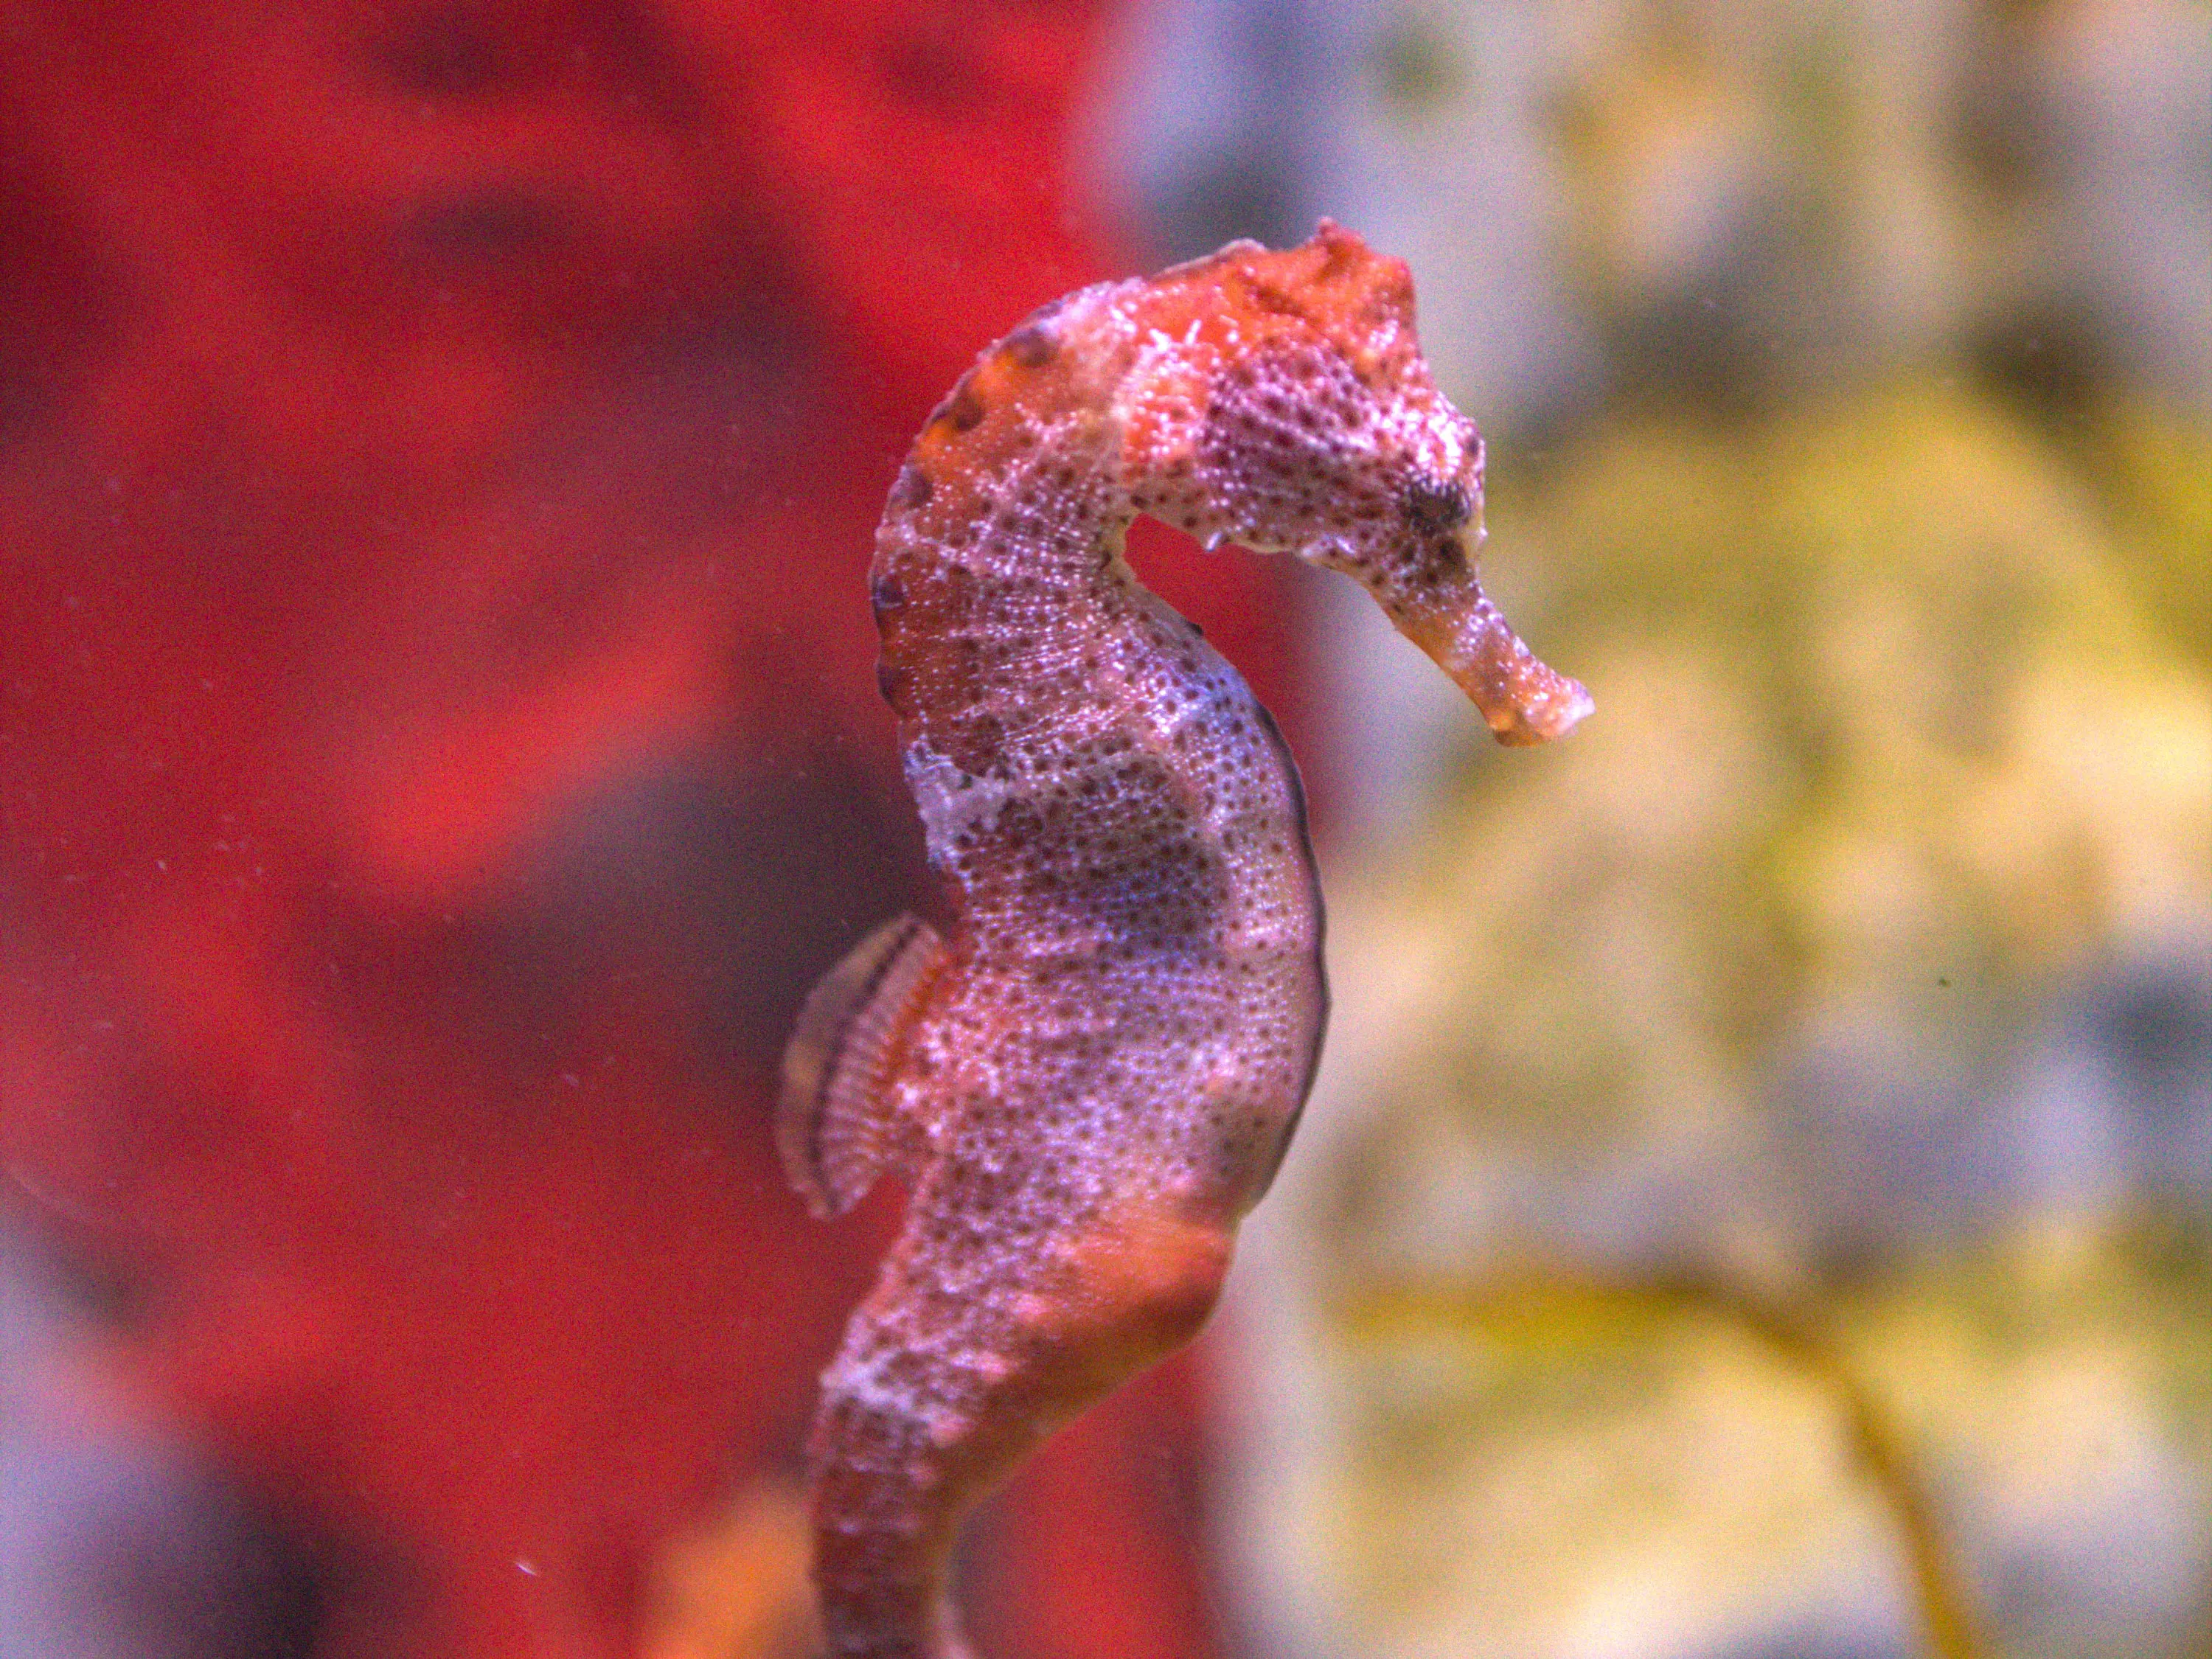 A red, pink and white seahorse speckled with dark spots floating in the water of a fish tank.